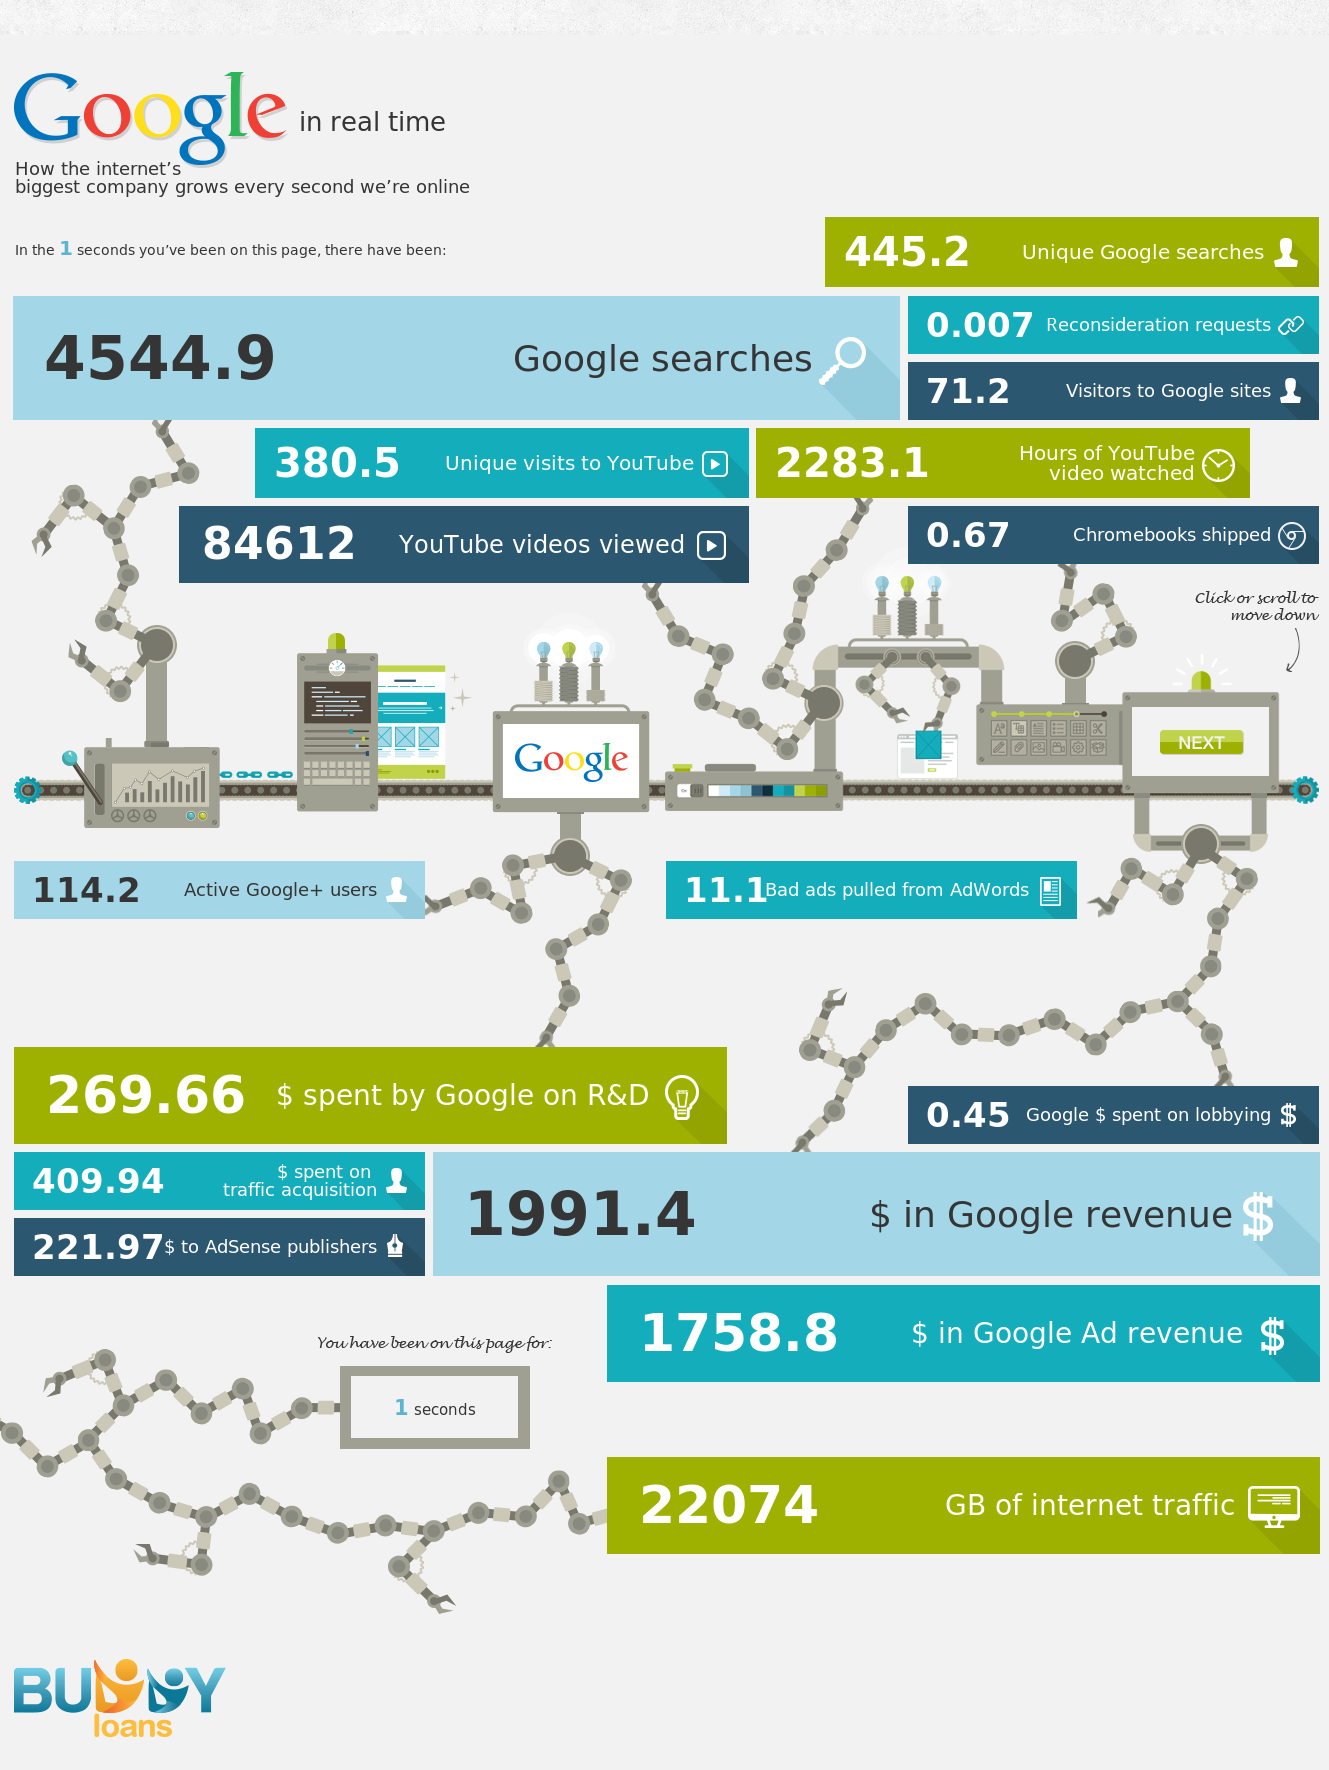 fascinating Googleplus and Google stats, you should know about. How Fast Google Make the Big Bucks? An Infographic Answer